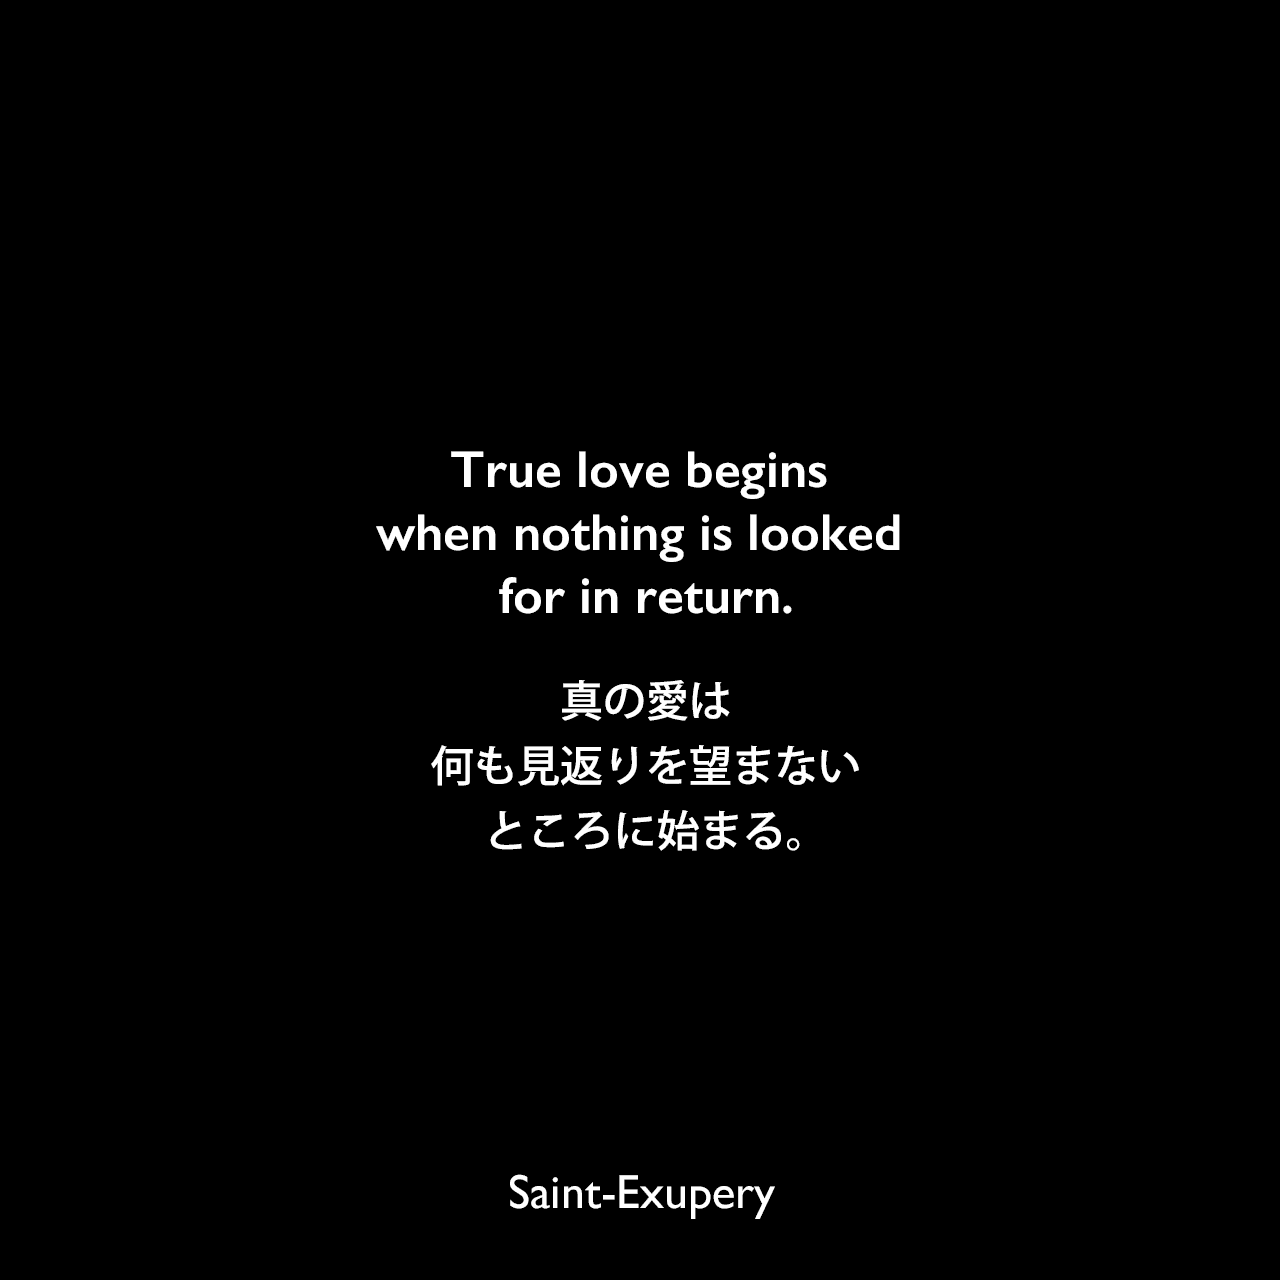 True love begins when nothing is looked for in return.真の愛は、何も見返りを望まないところに始まる。Saint-Exupery